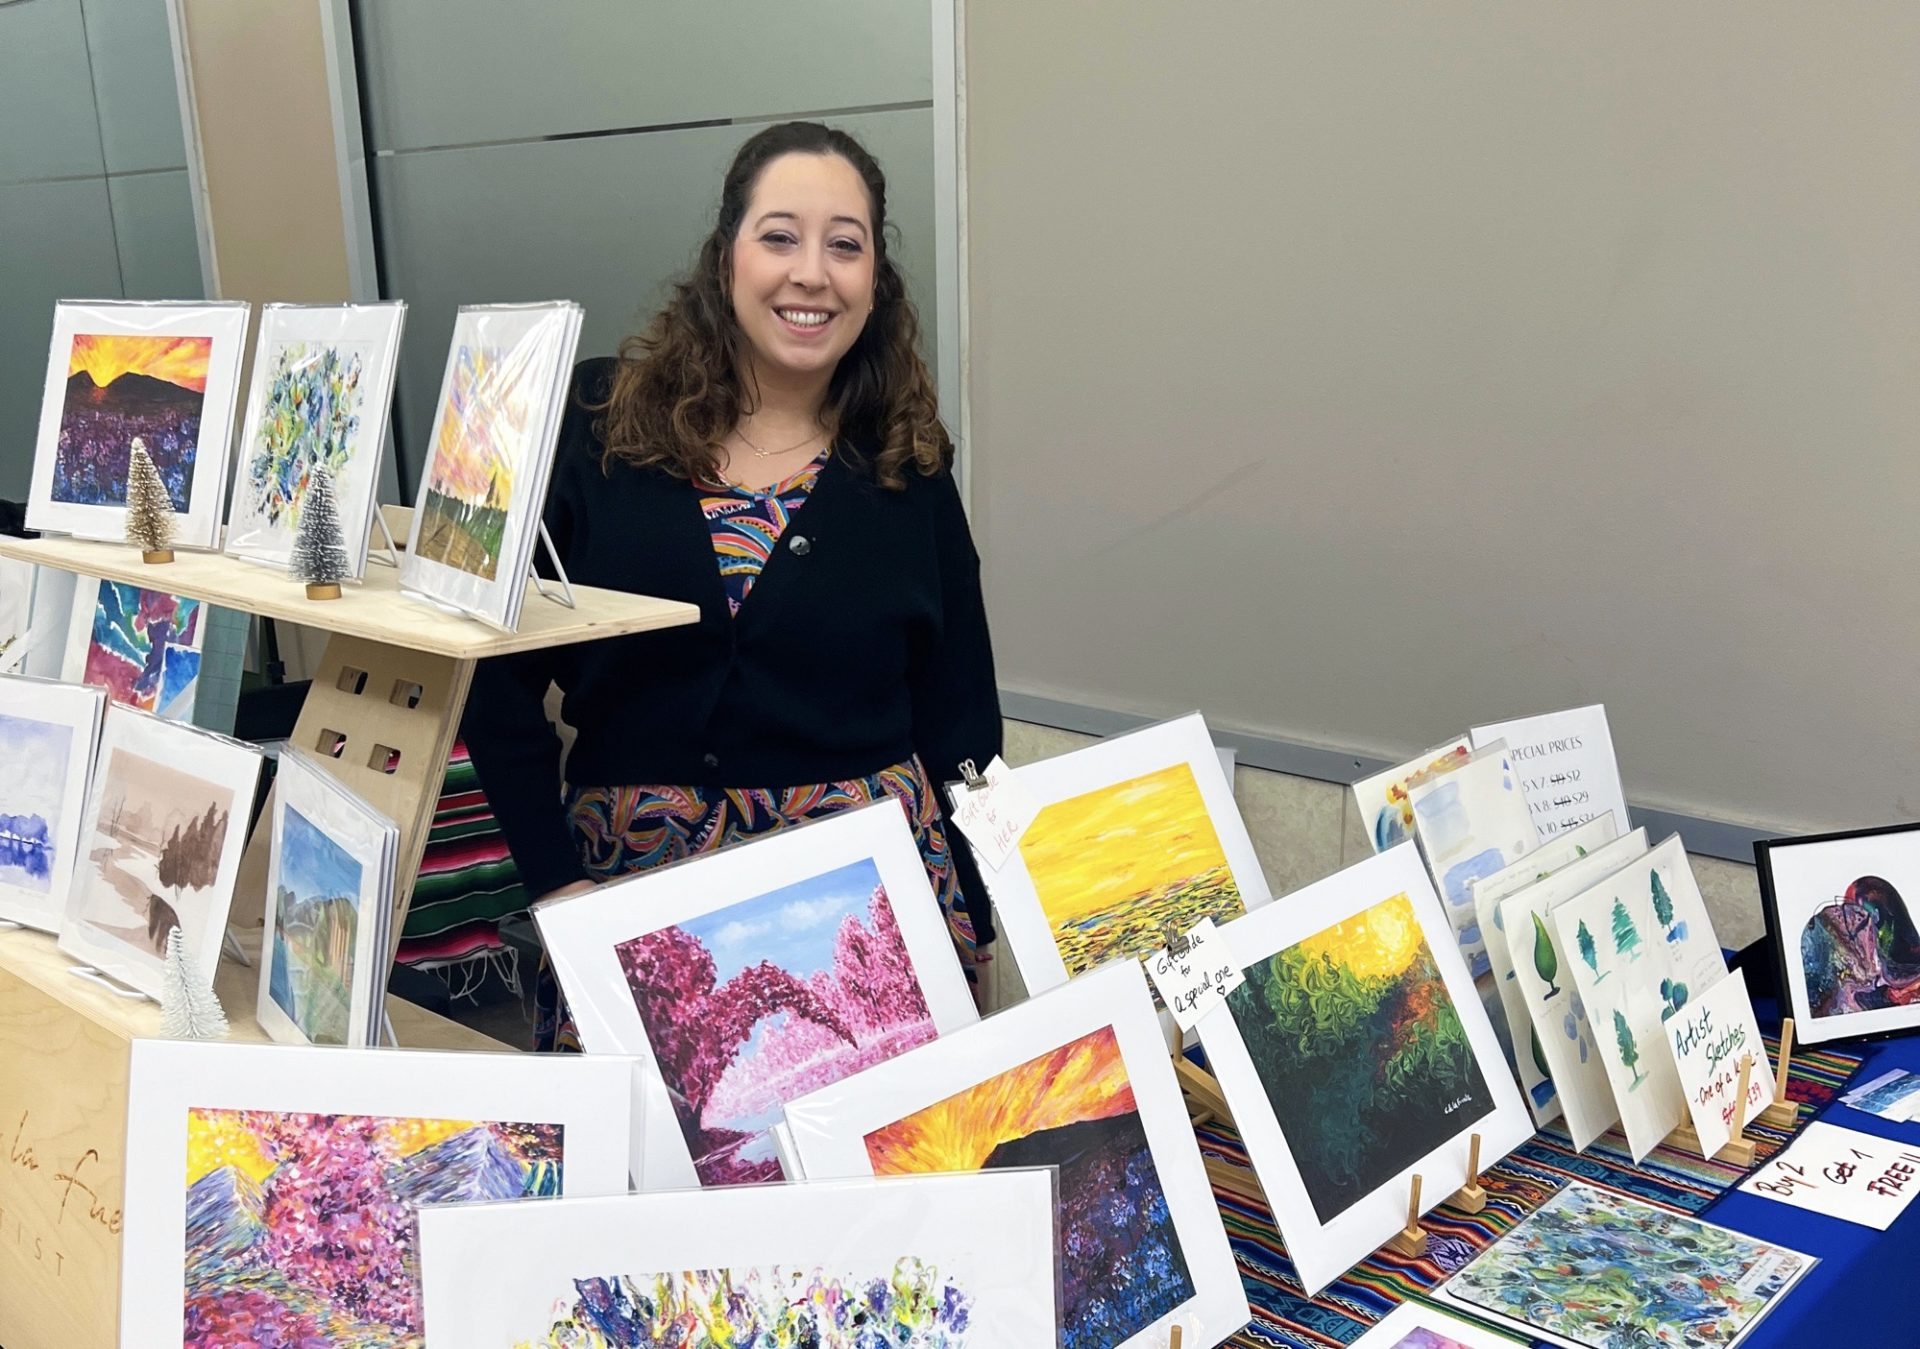 A woman in a black sweater and a colorful shirt stands behind a table of paintings